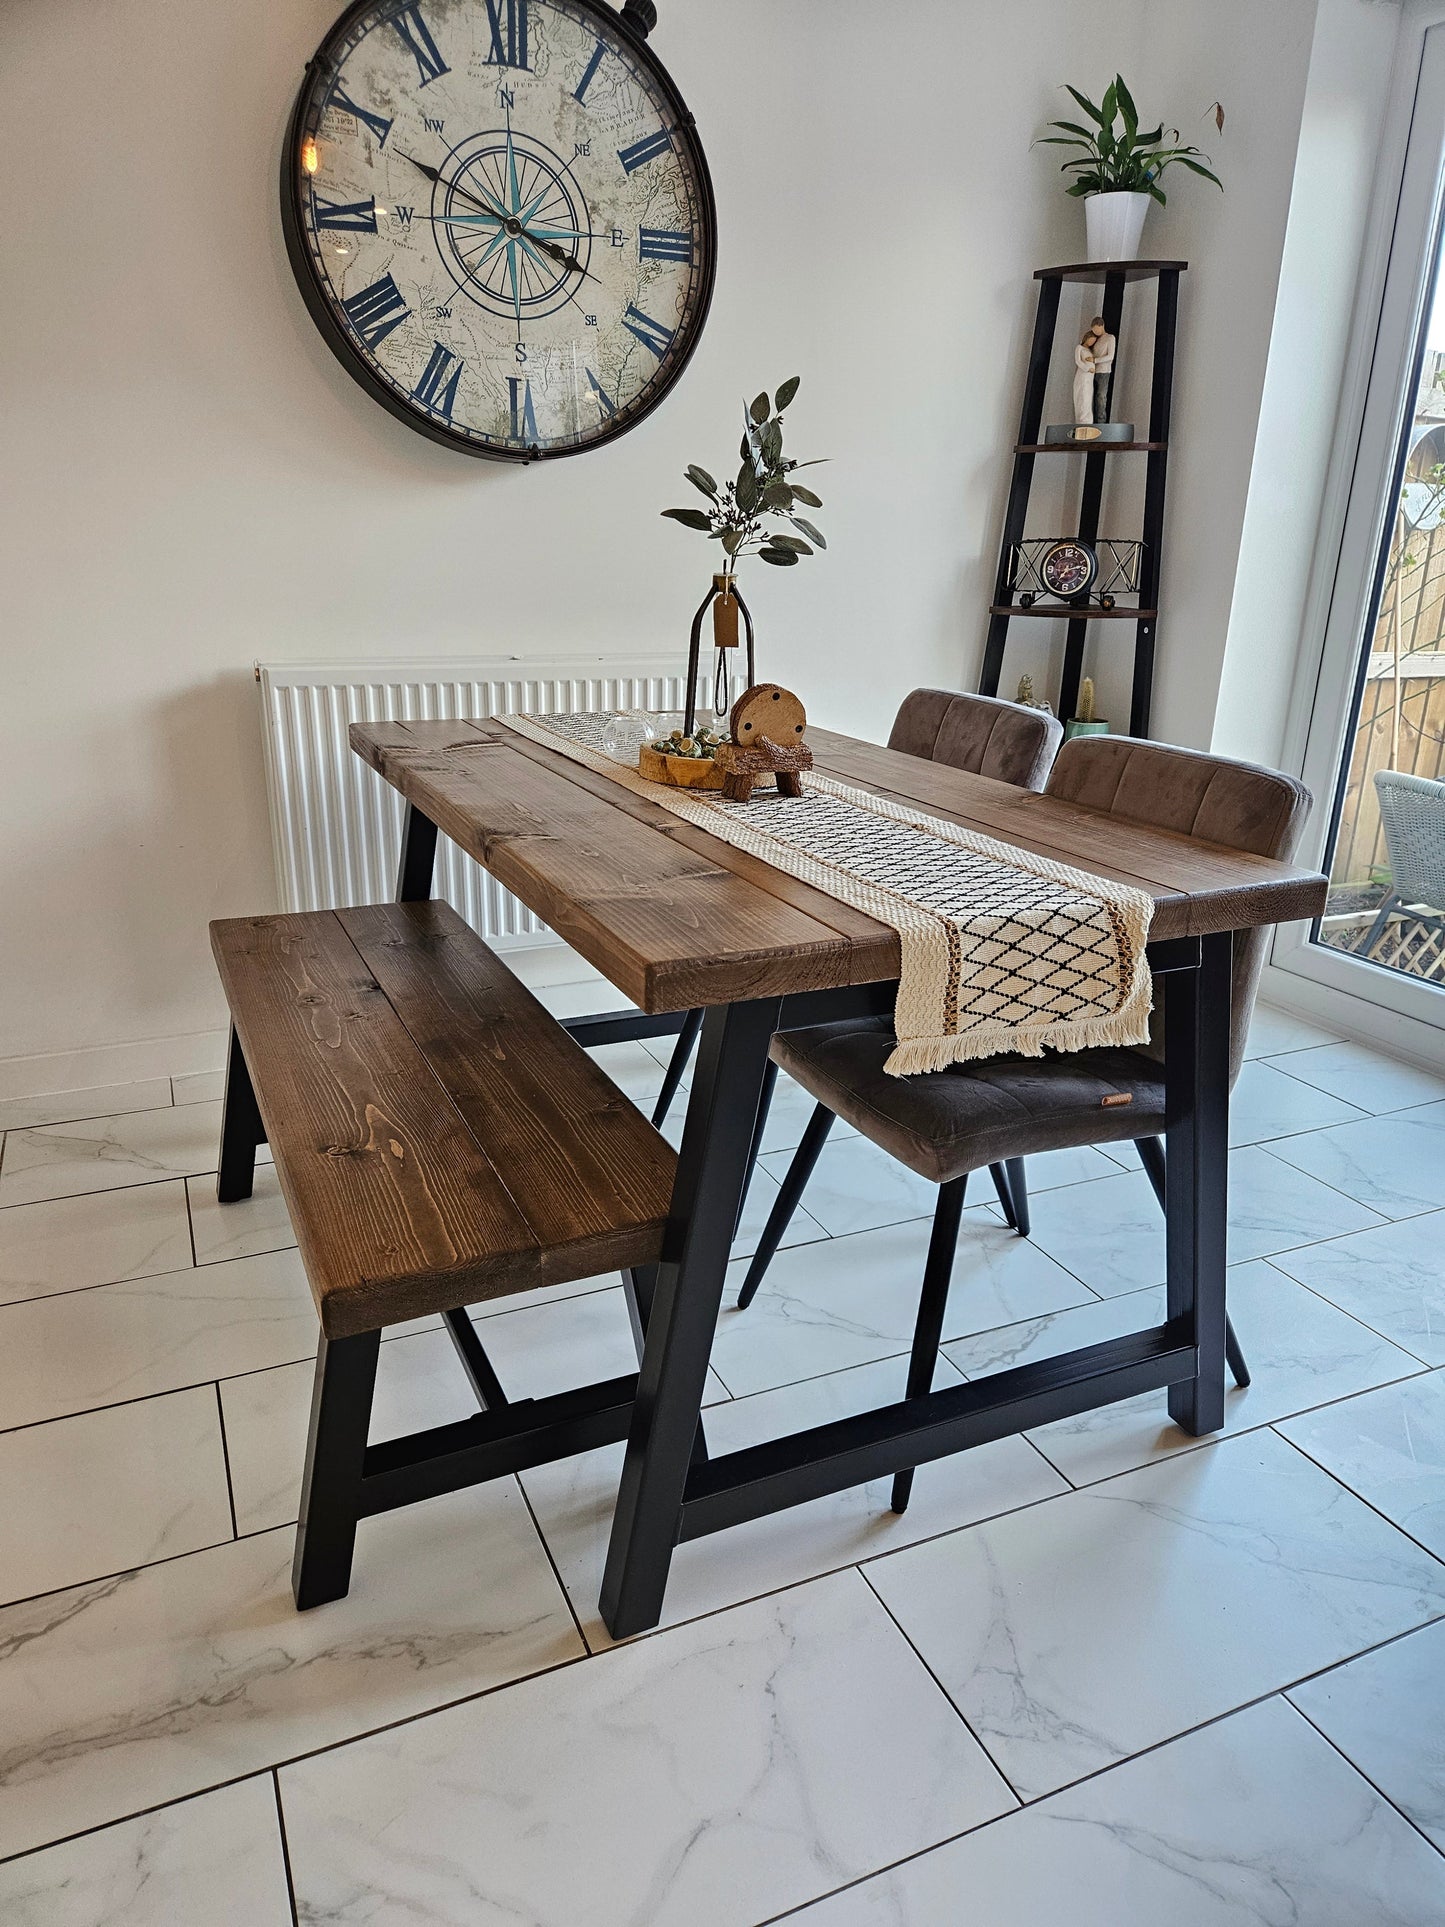 MAK Range A Frame Dining table with bench and 2 chairs